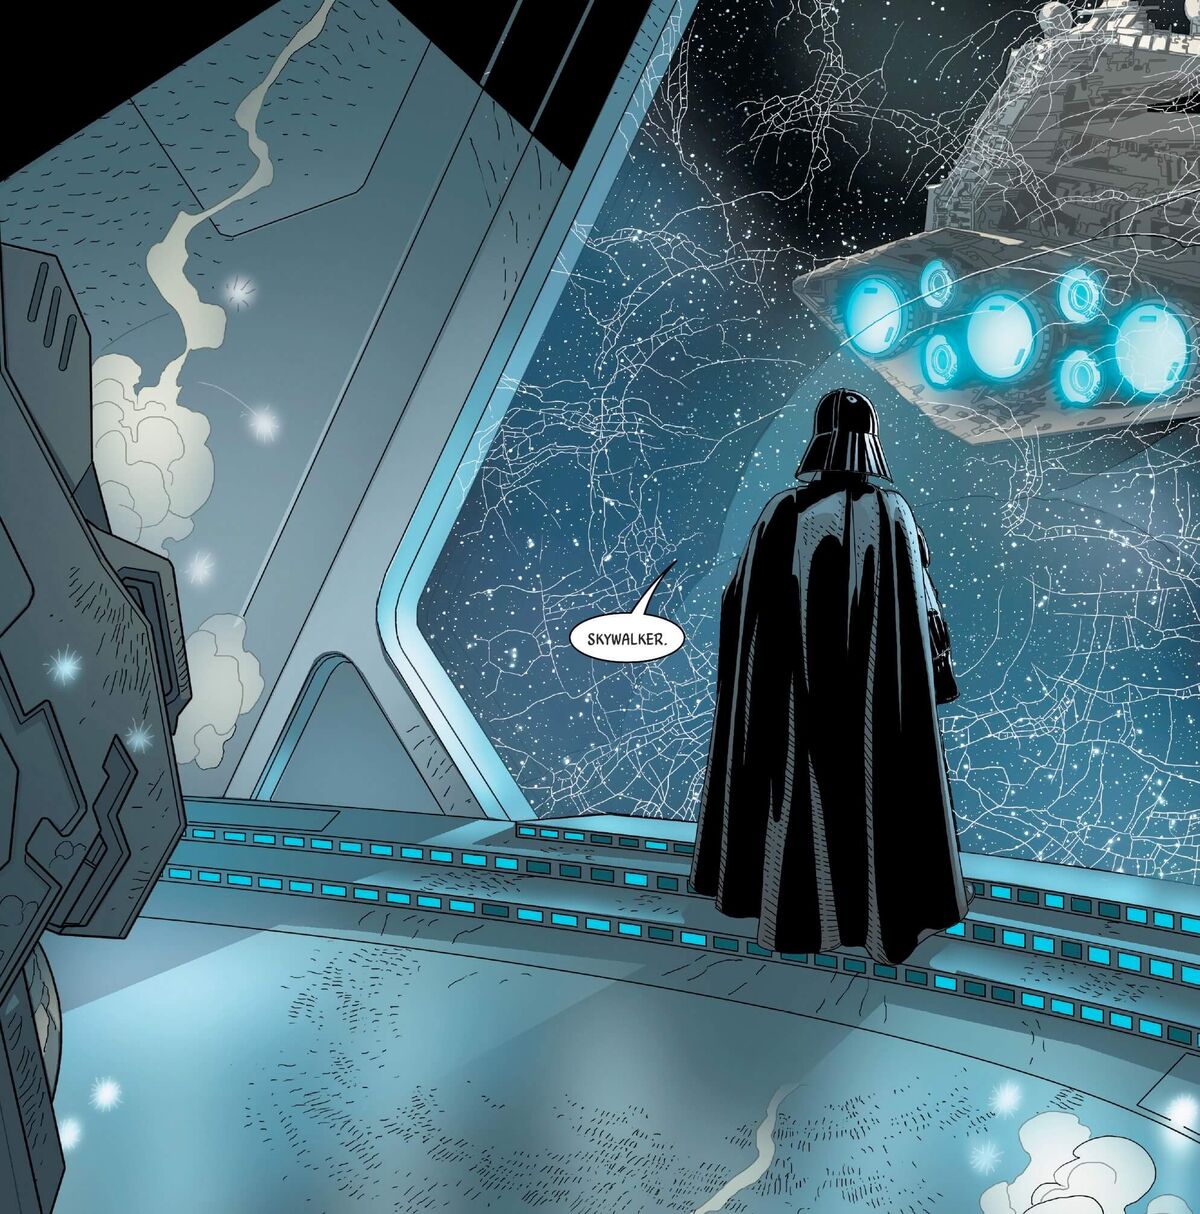 Panel from Darth Vader, Issue 6